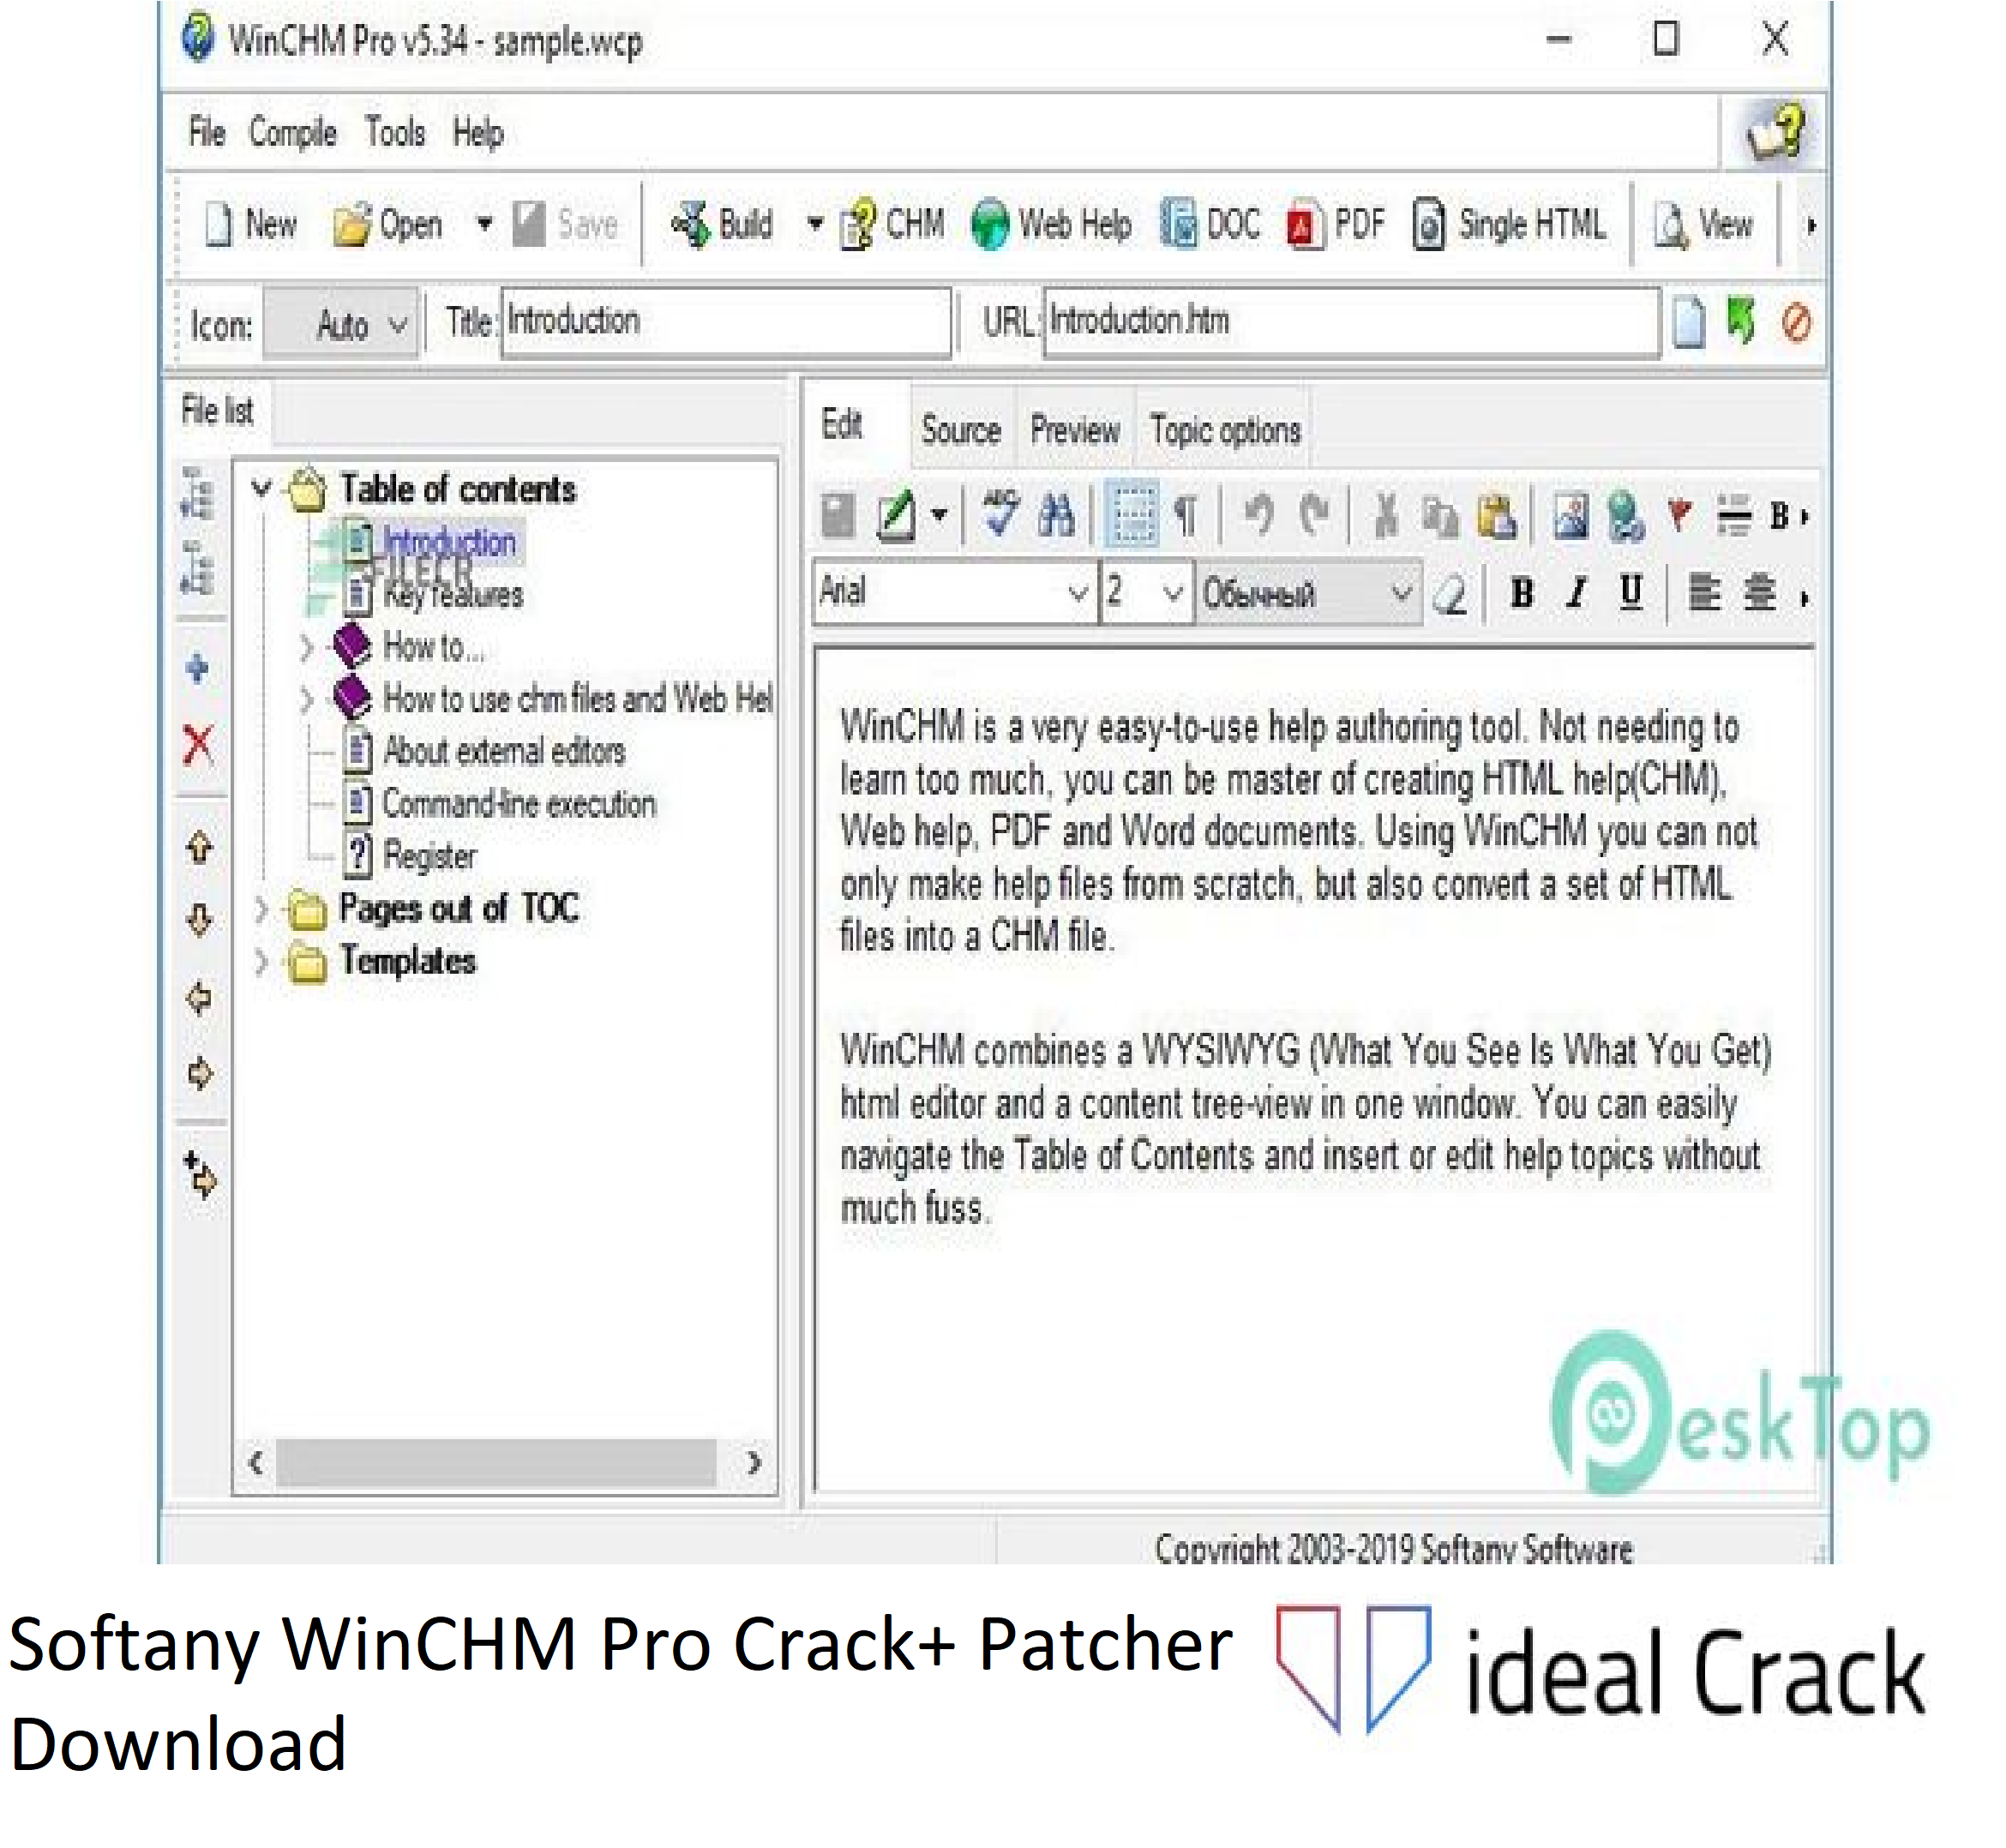 Softany WinCHM Pro Crack+ Patcher Download